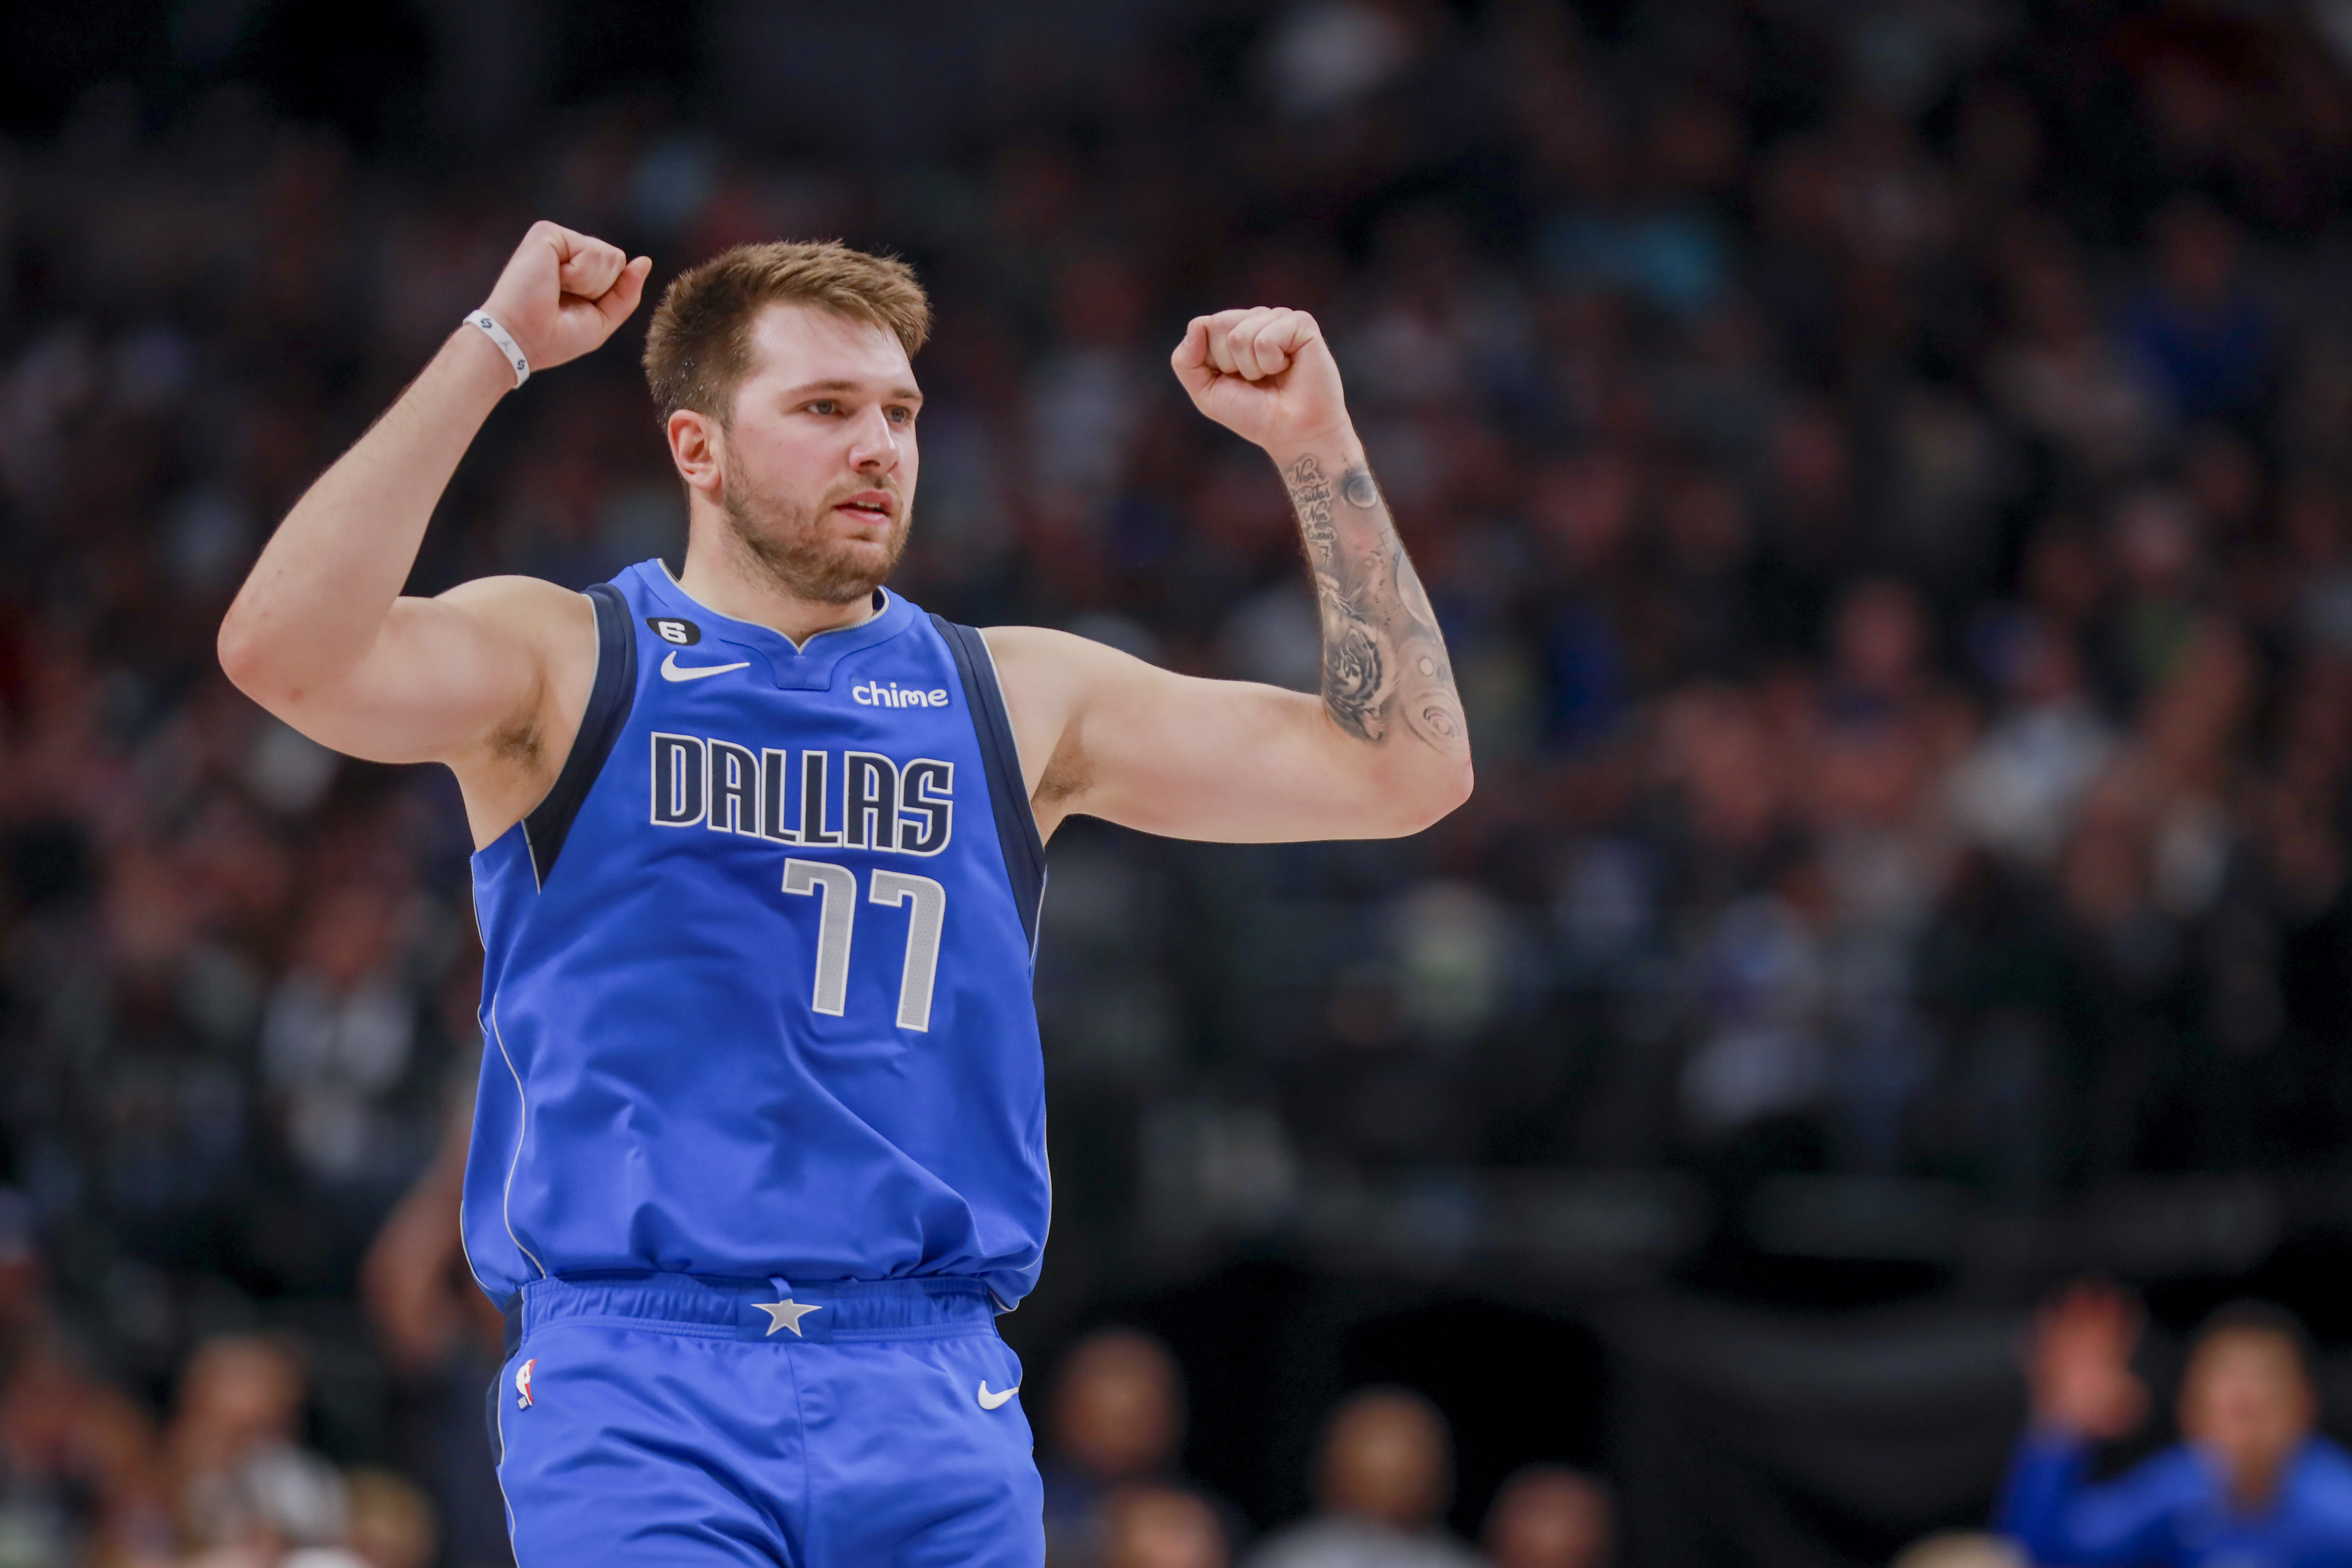 luka doncic jersey chime